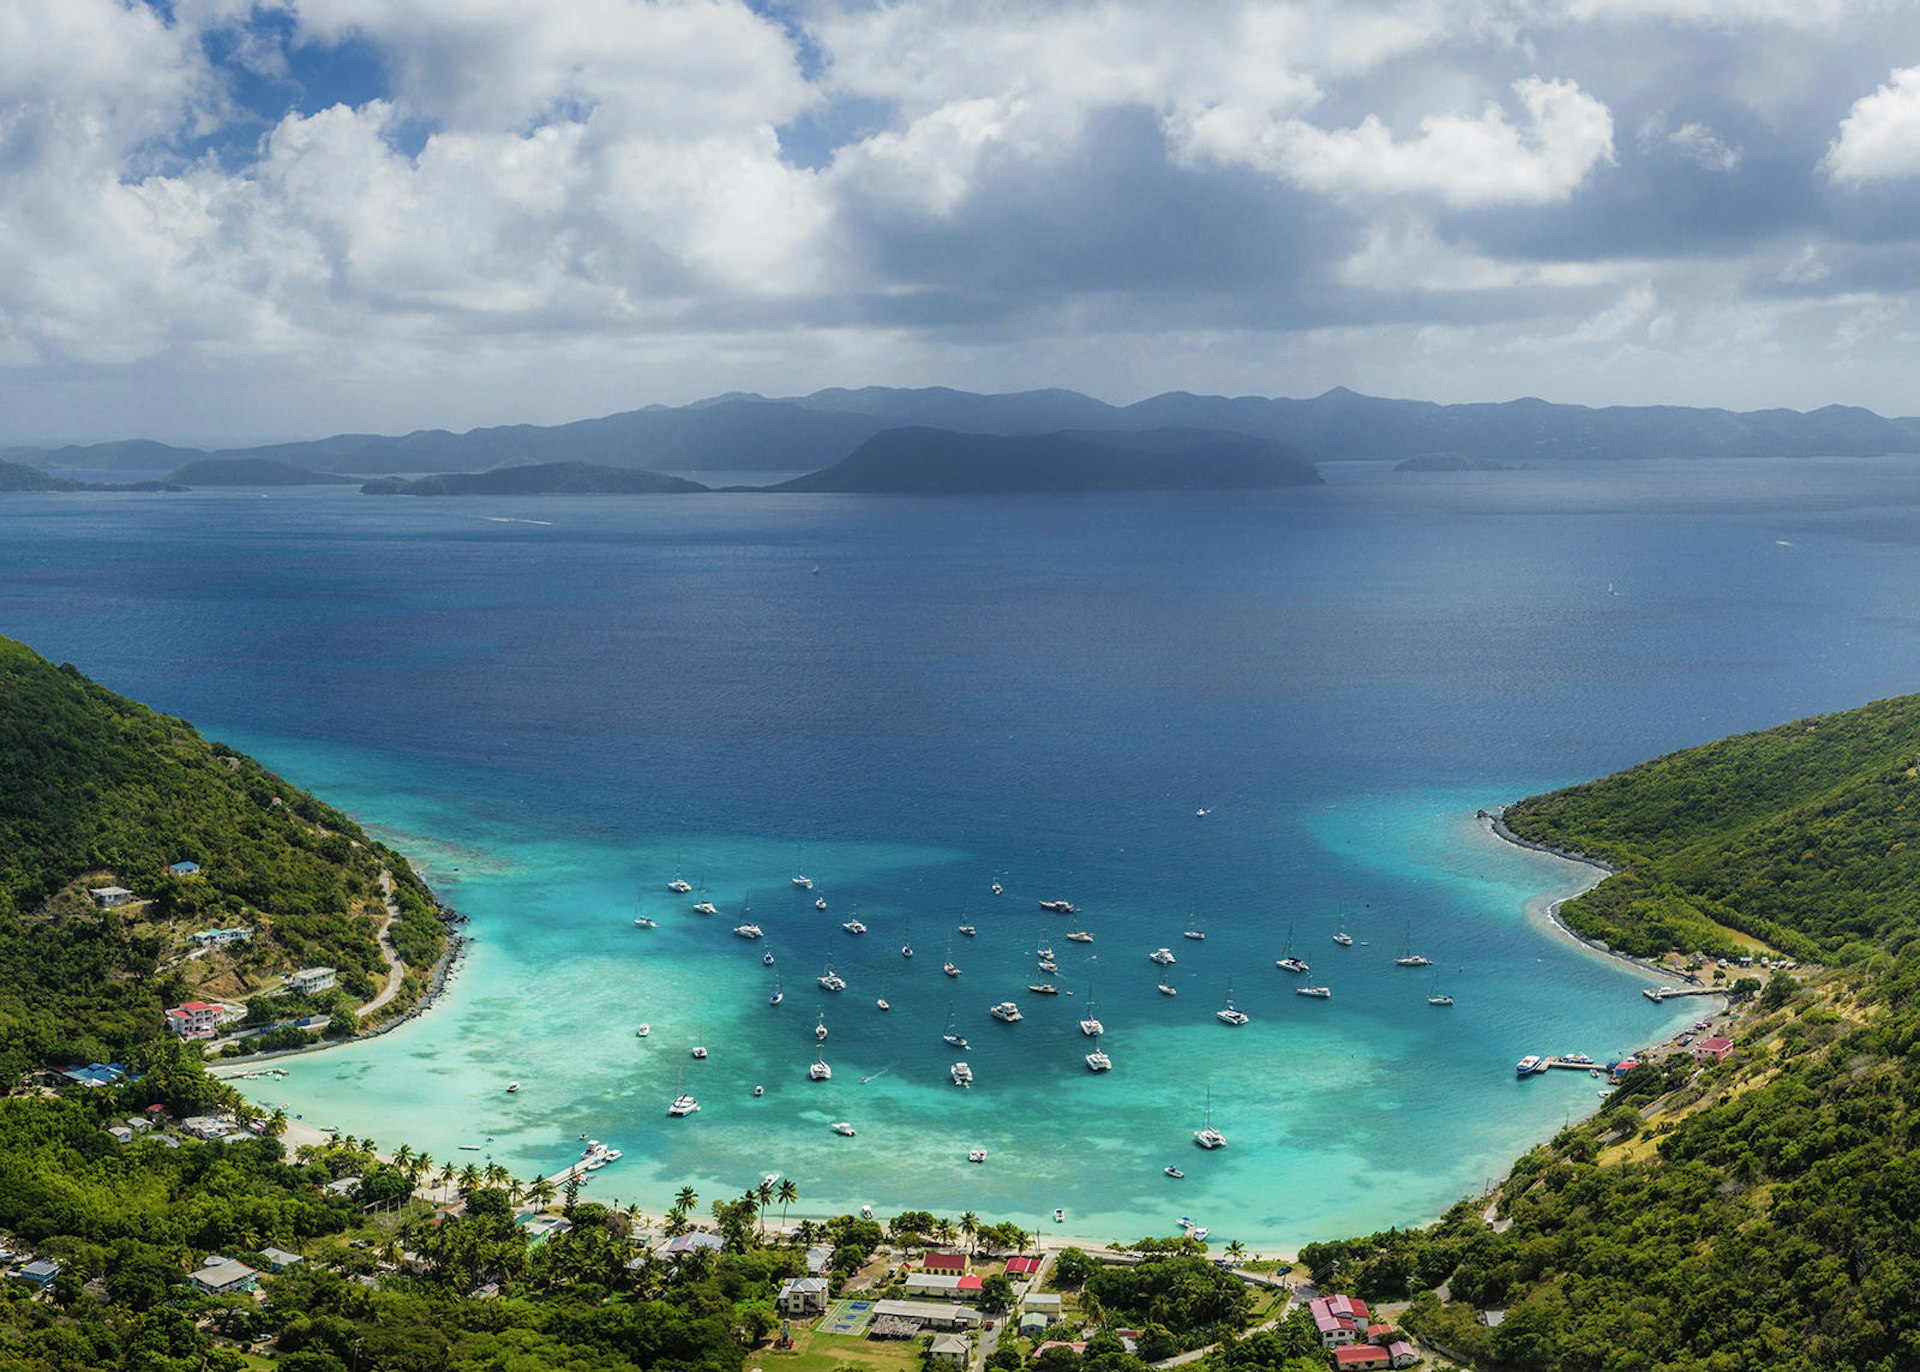 British Virgin Islands, Jost Van Dyke, Great Harbour, elevated view from Majohnny Hill © Walter Bibikow / Getty images